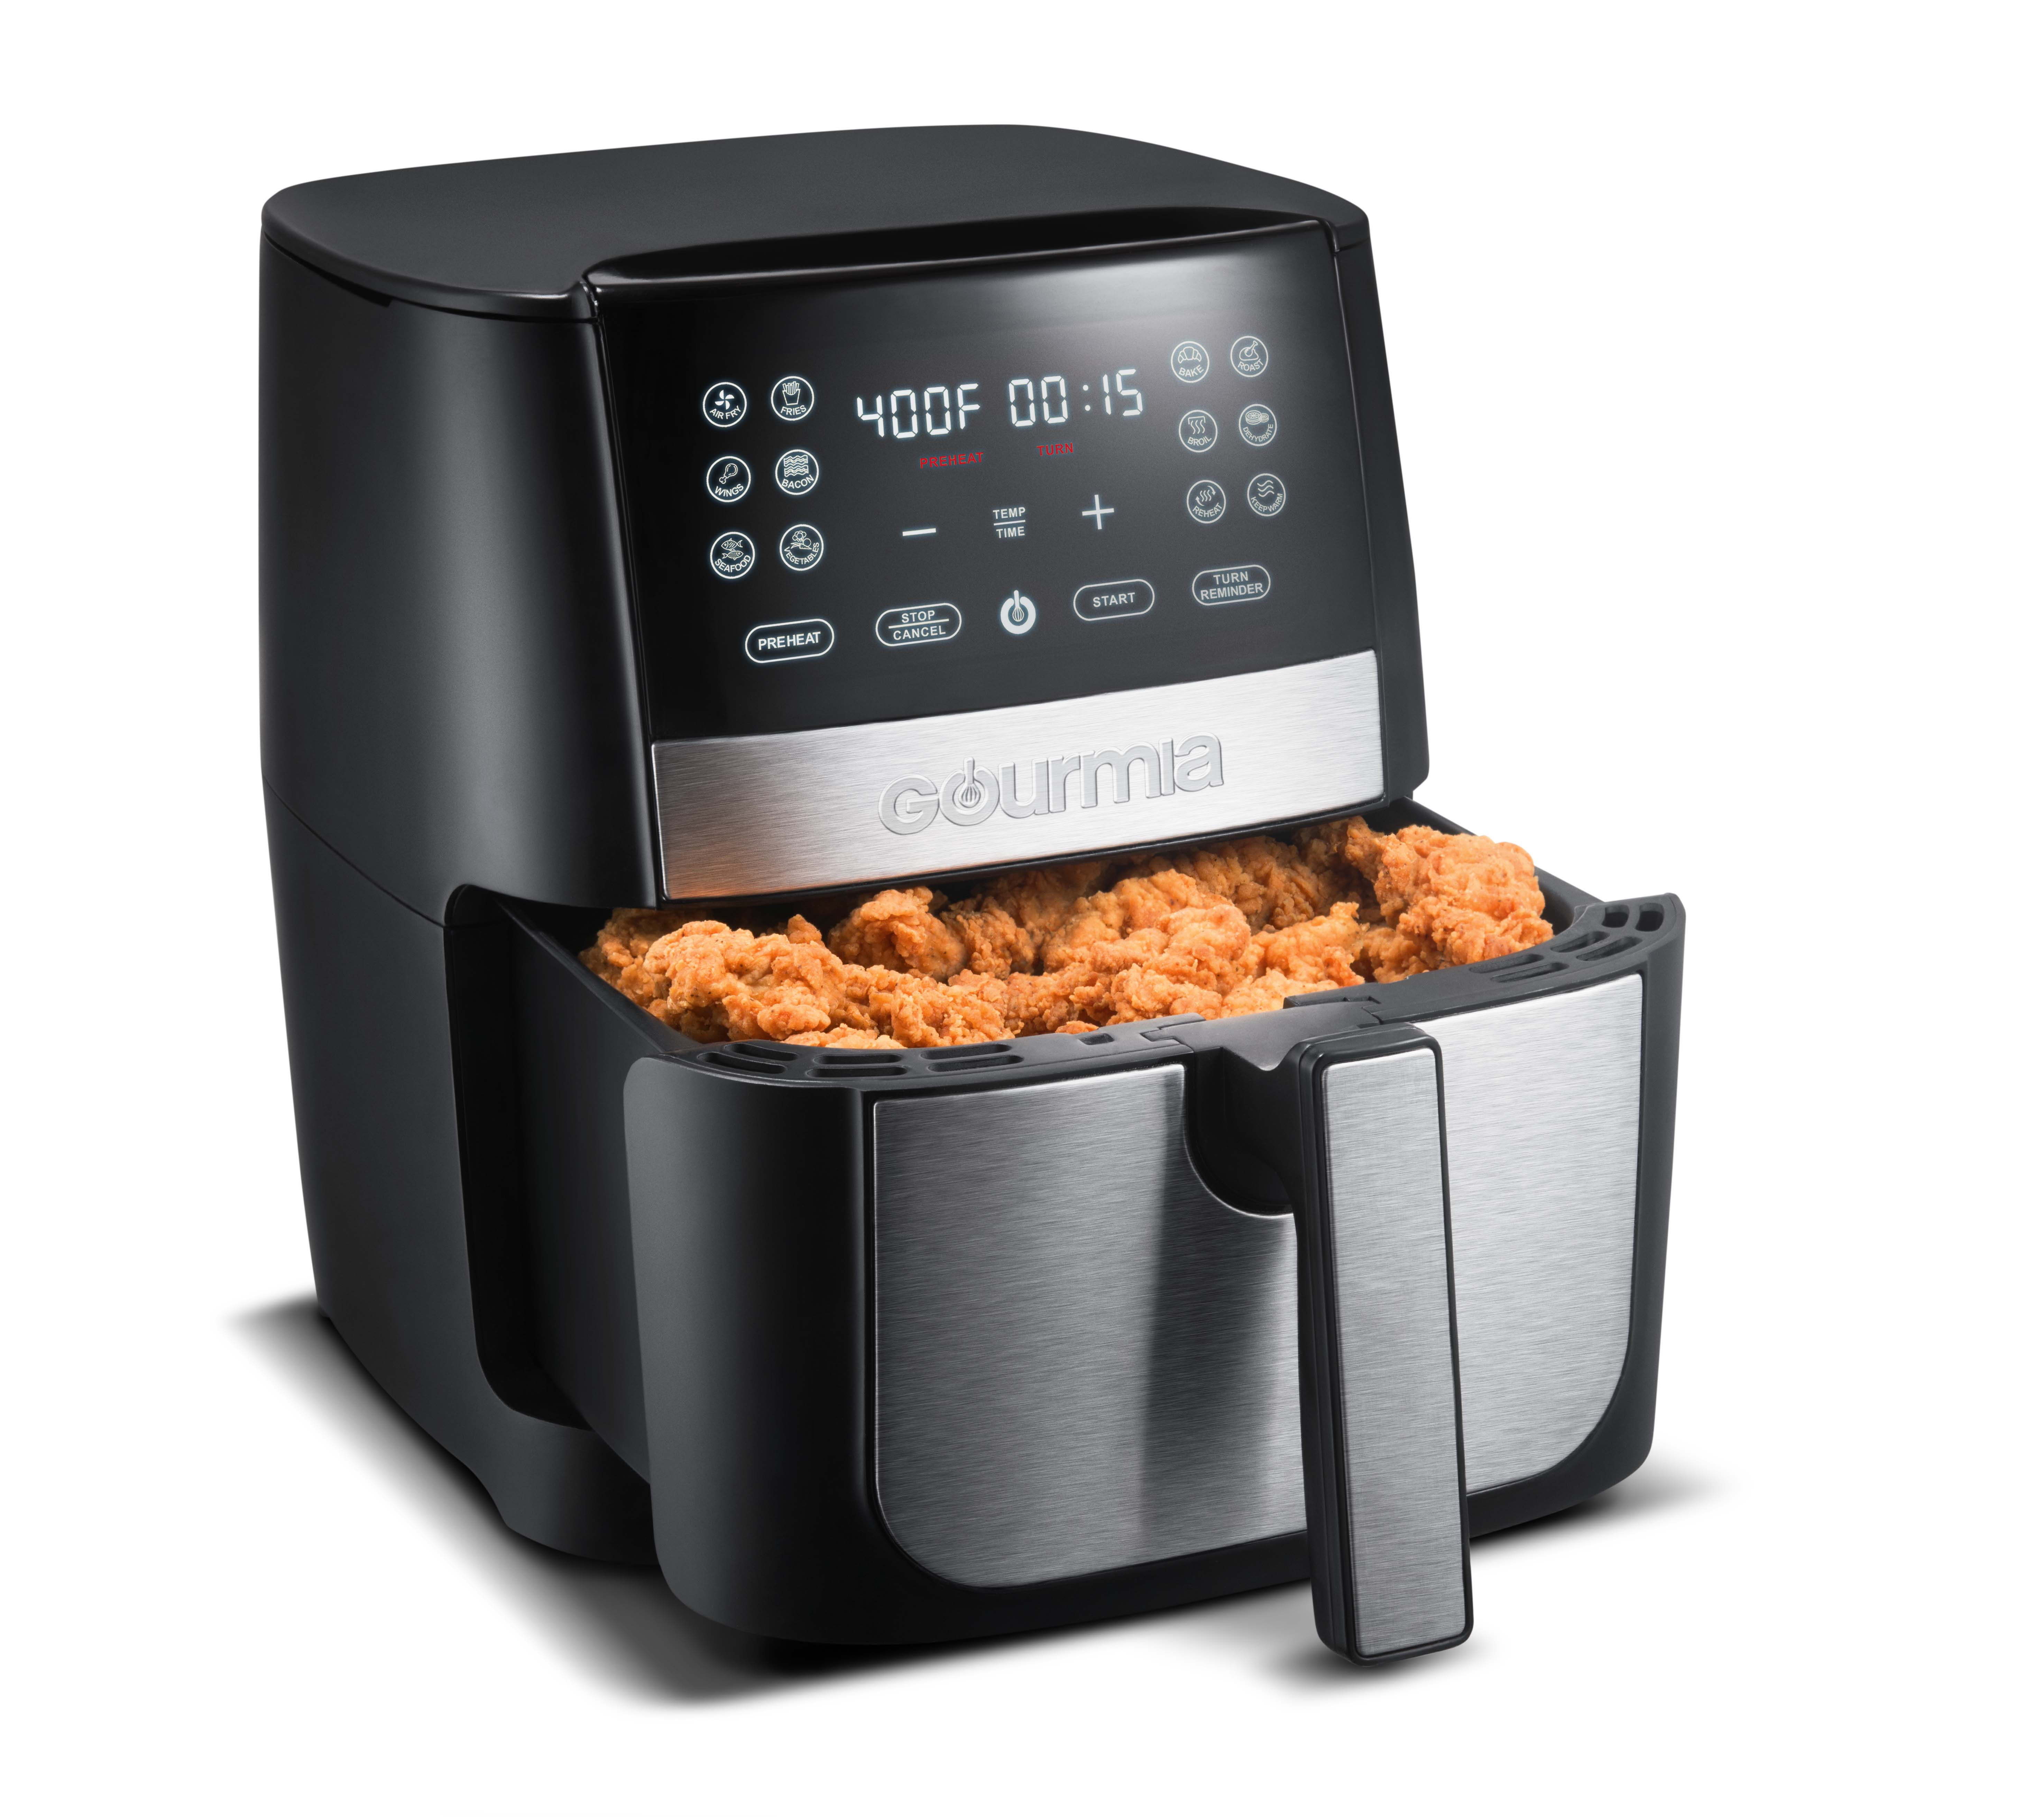 Gourmia 8 Qt Digital Air Fryer with FryForce 360 and Guided Cooking, Black/Stainless Steel, GAF826, 14.82 H, New - image 2 of 3